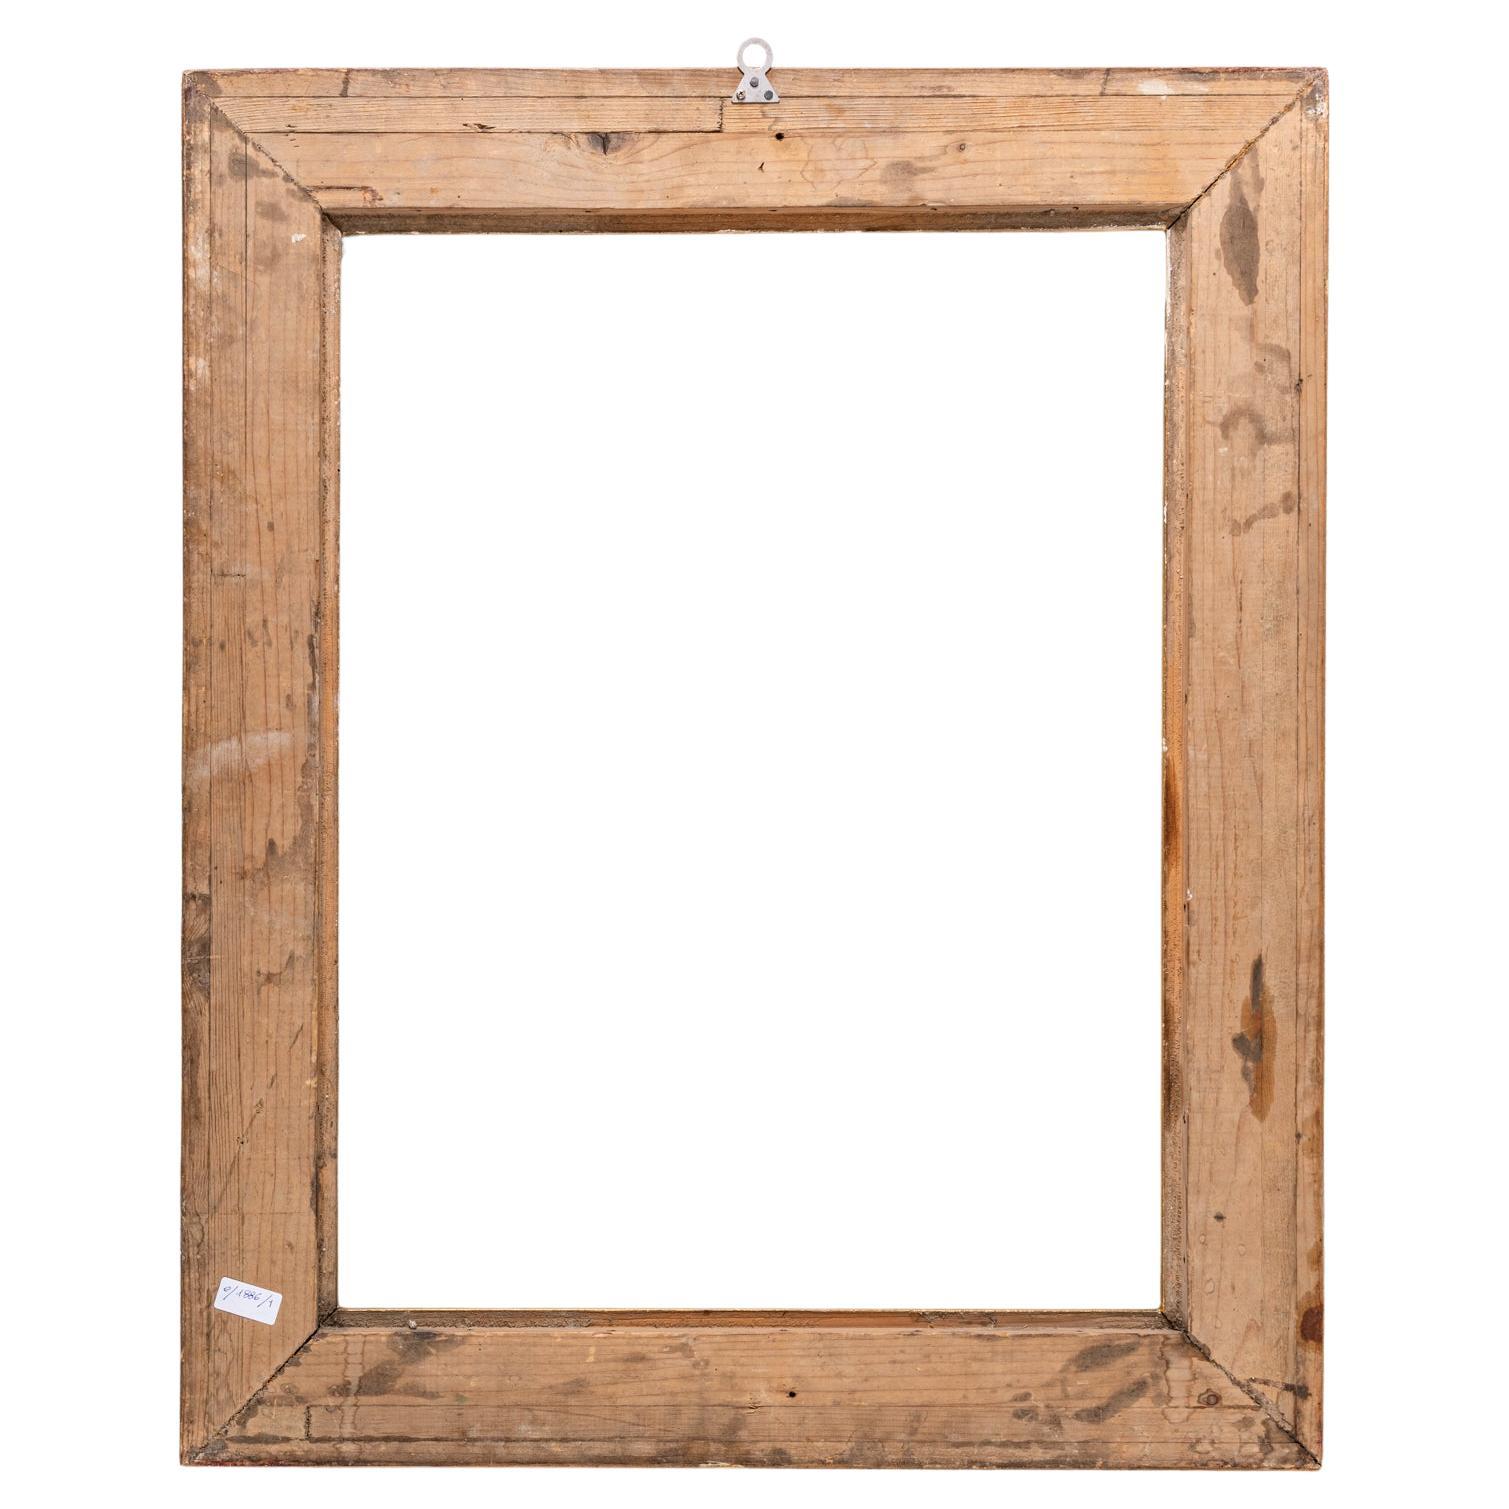 O/1886-1 -That's a beautiful gilded wood frame, perfect both for painting and for mirror. Not little, not large. Fair good price.